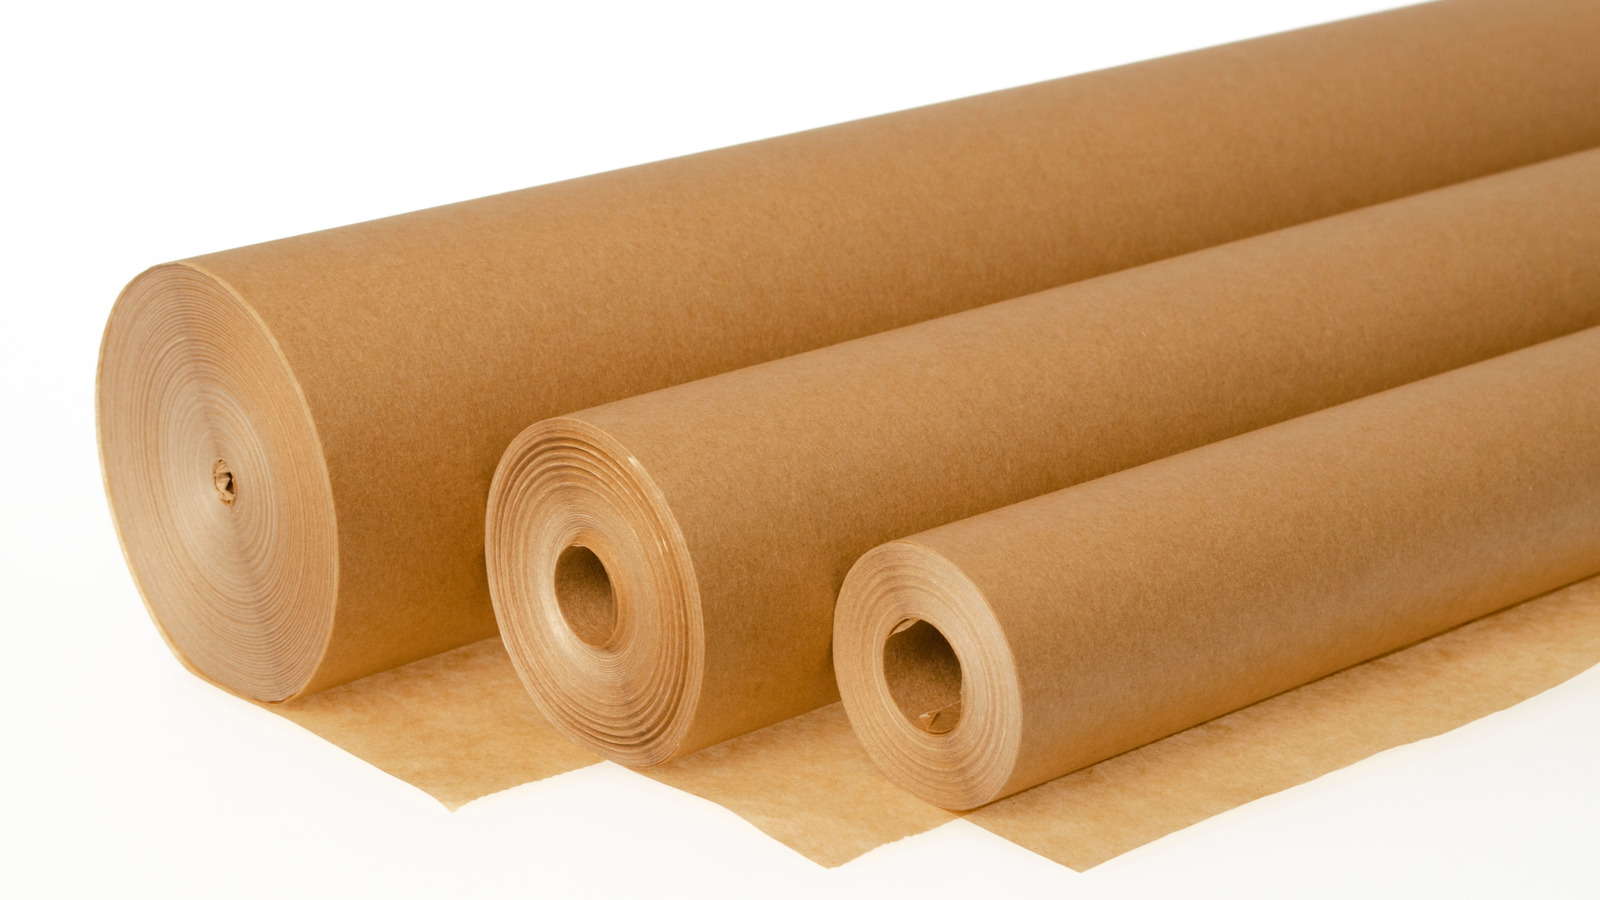 Read This Before Reusing Parchment Paper